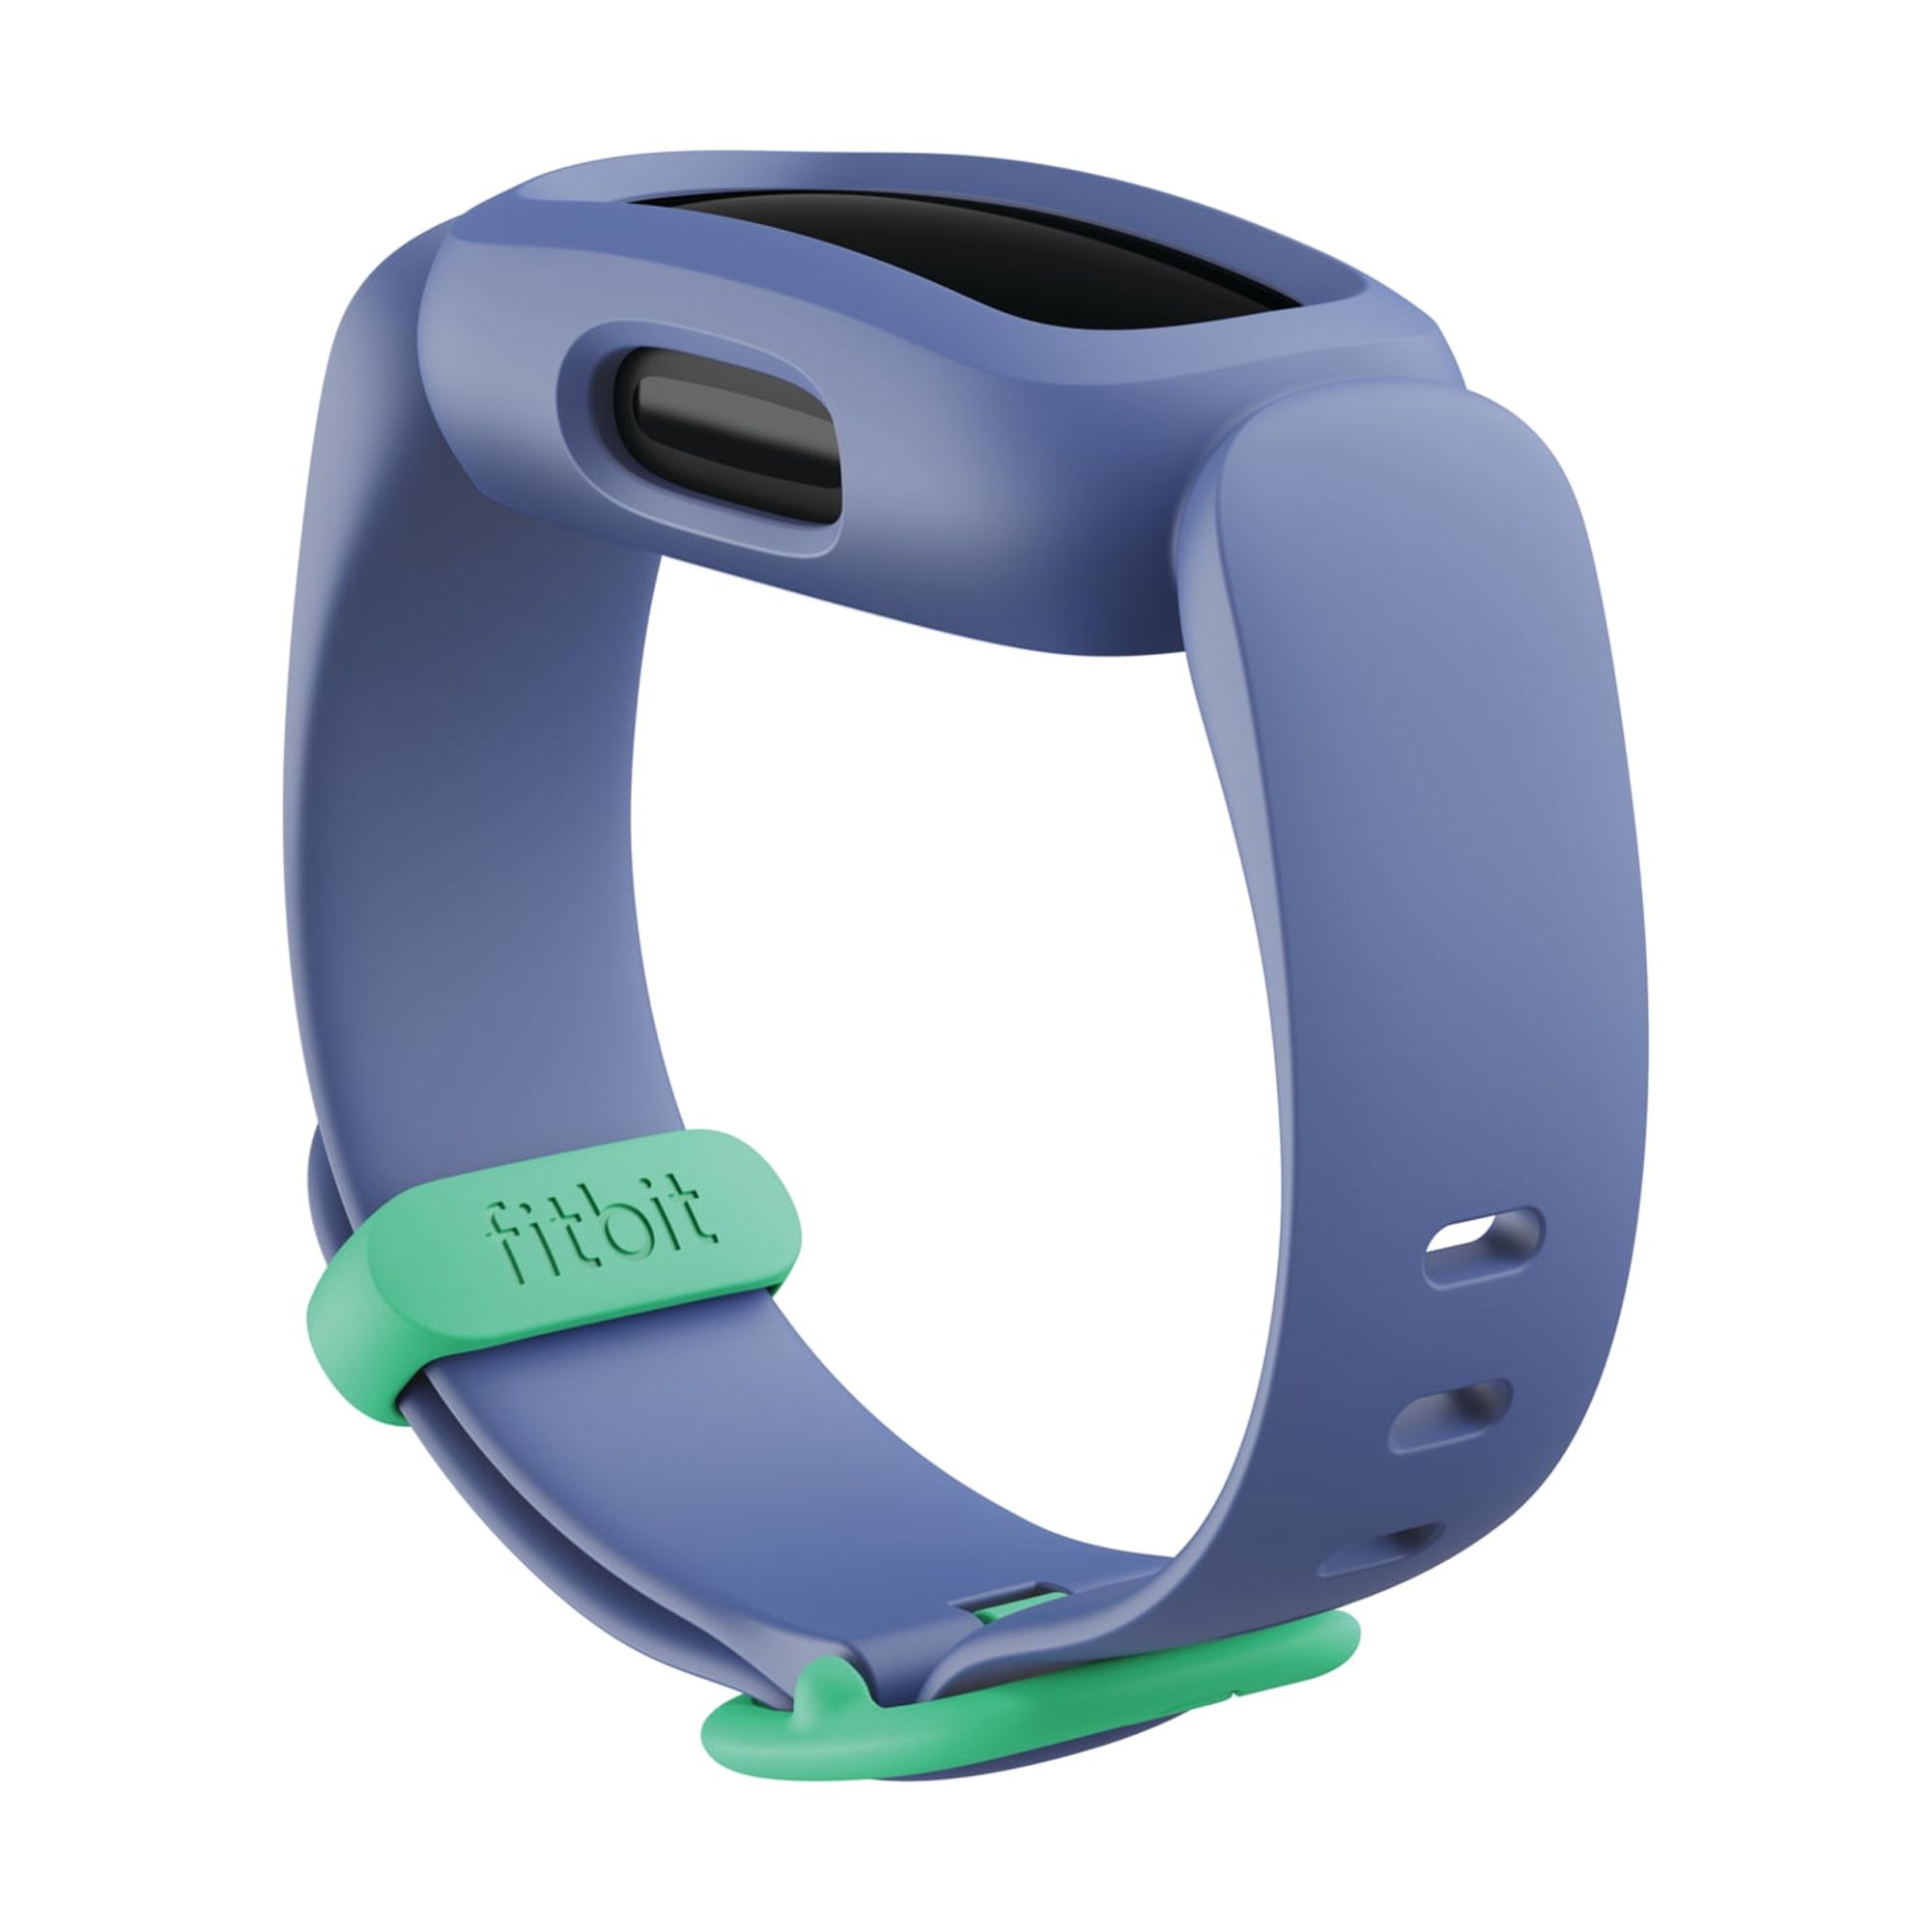 Fitbit Ace 3 Activity Tracker for Kids - Cosmic Blue/Astro Green - image 4 of 6